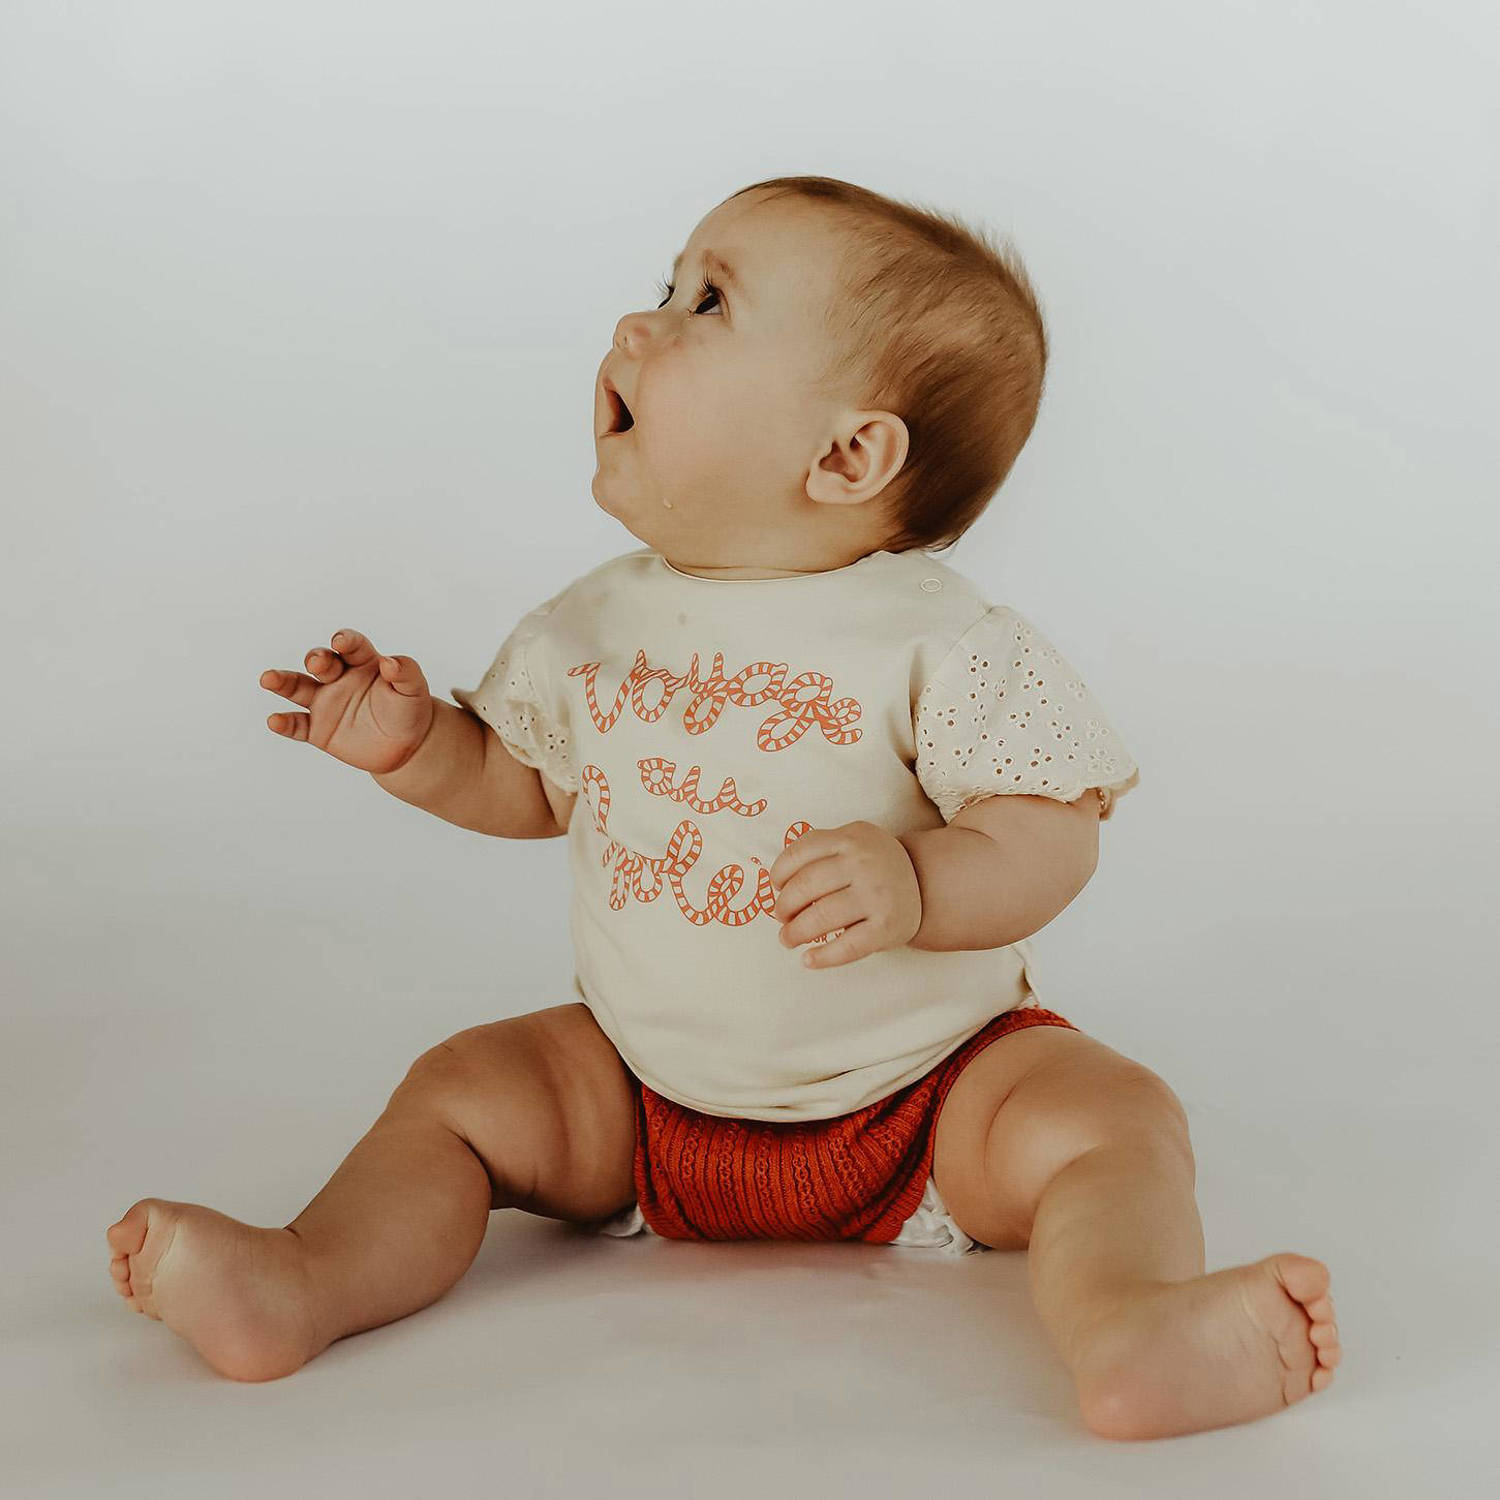 Your Wishes baby T-shirt Penny met tekst offwhite